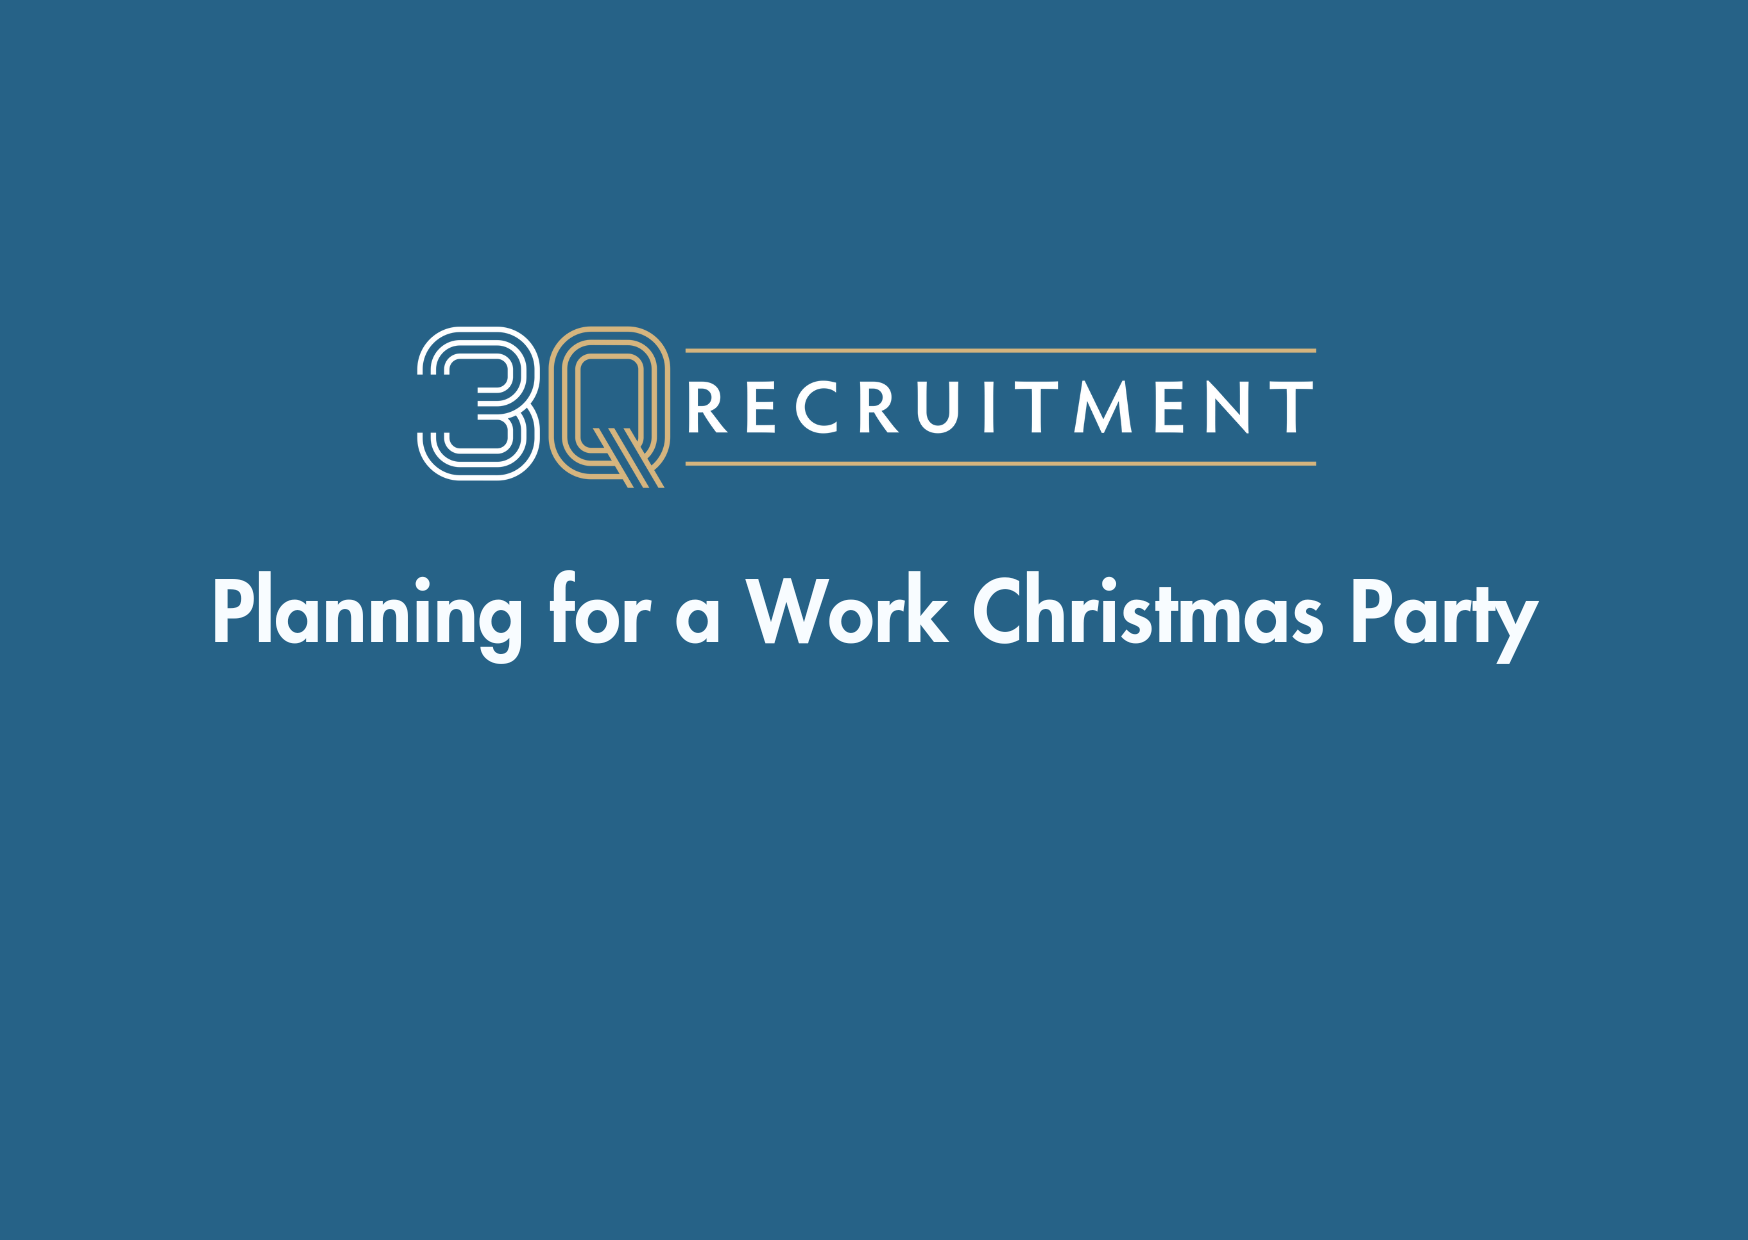 3Q Recruitment Planning for a Work Christmas Party